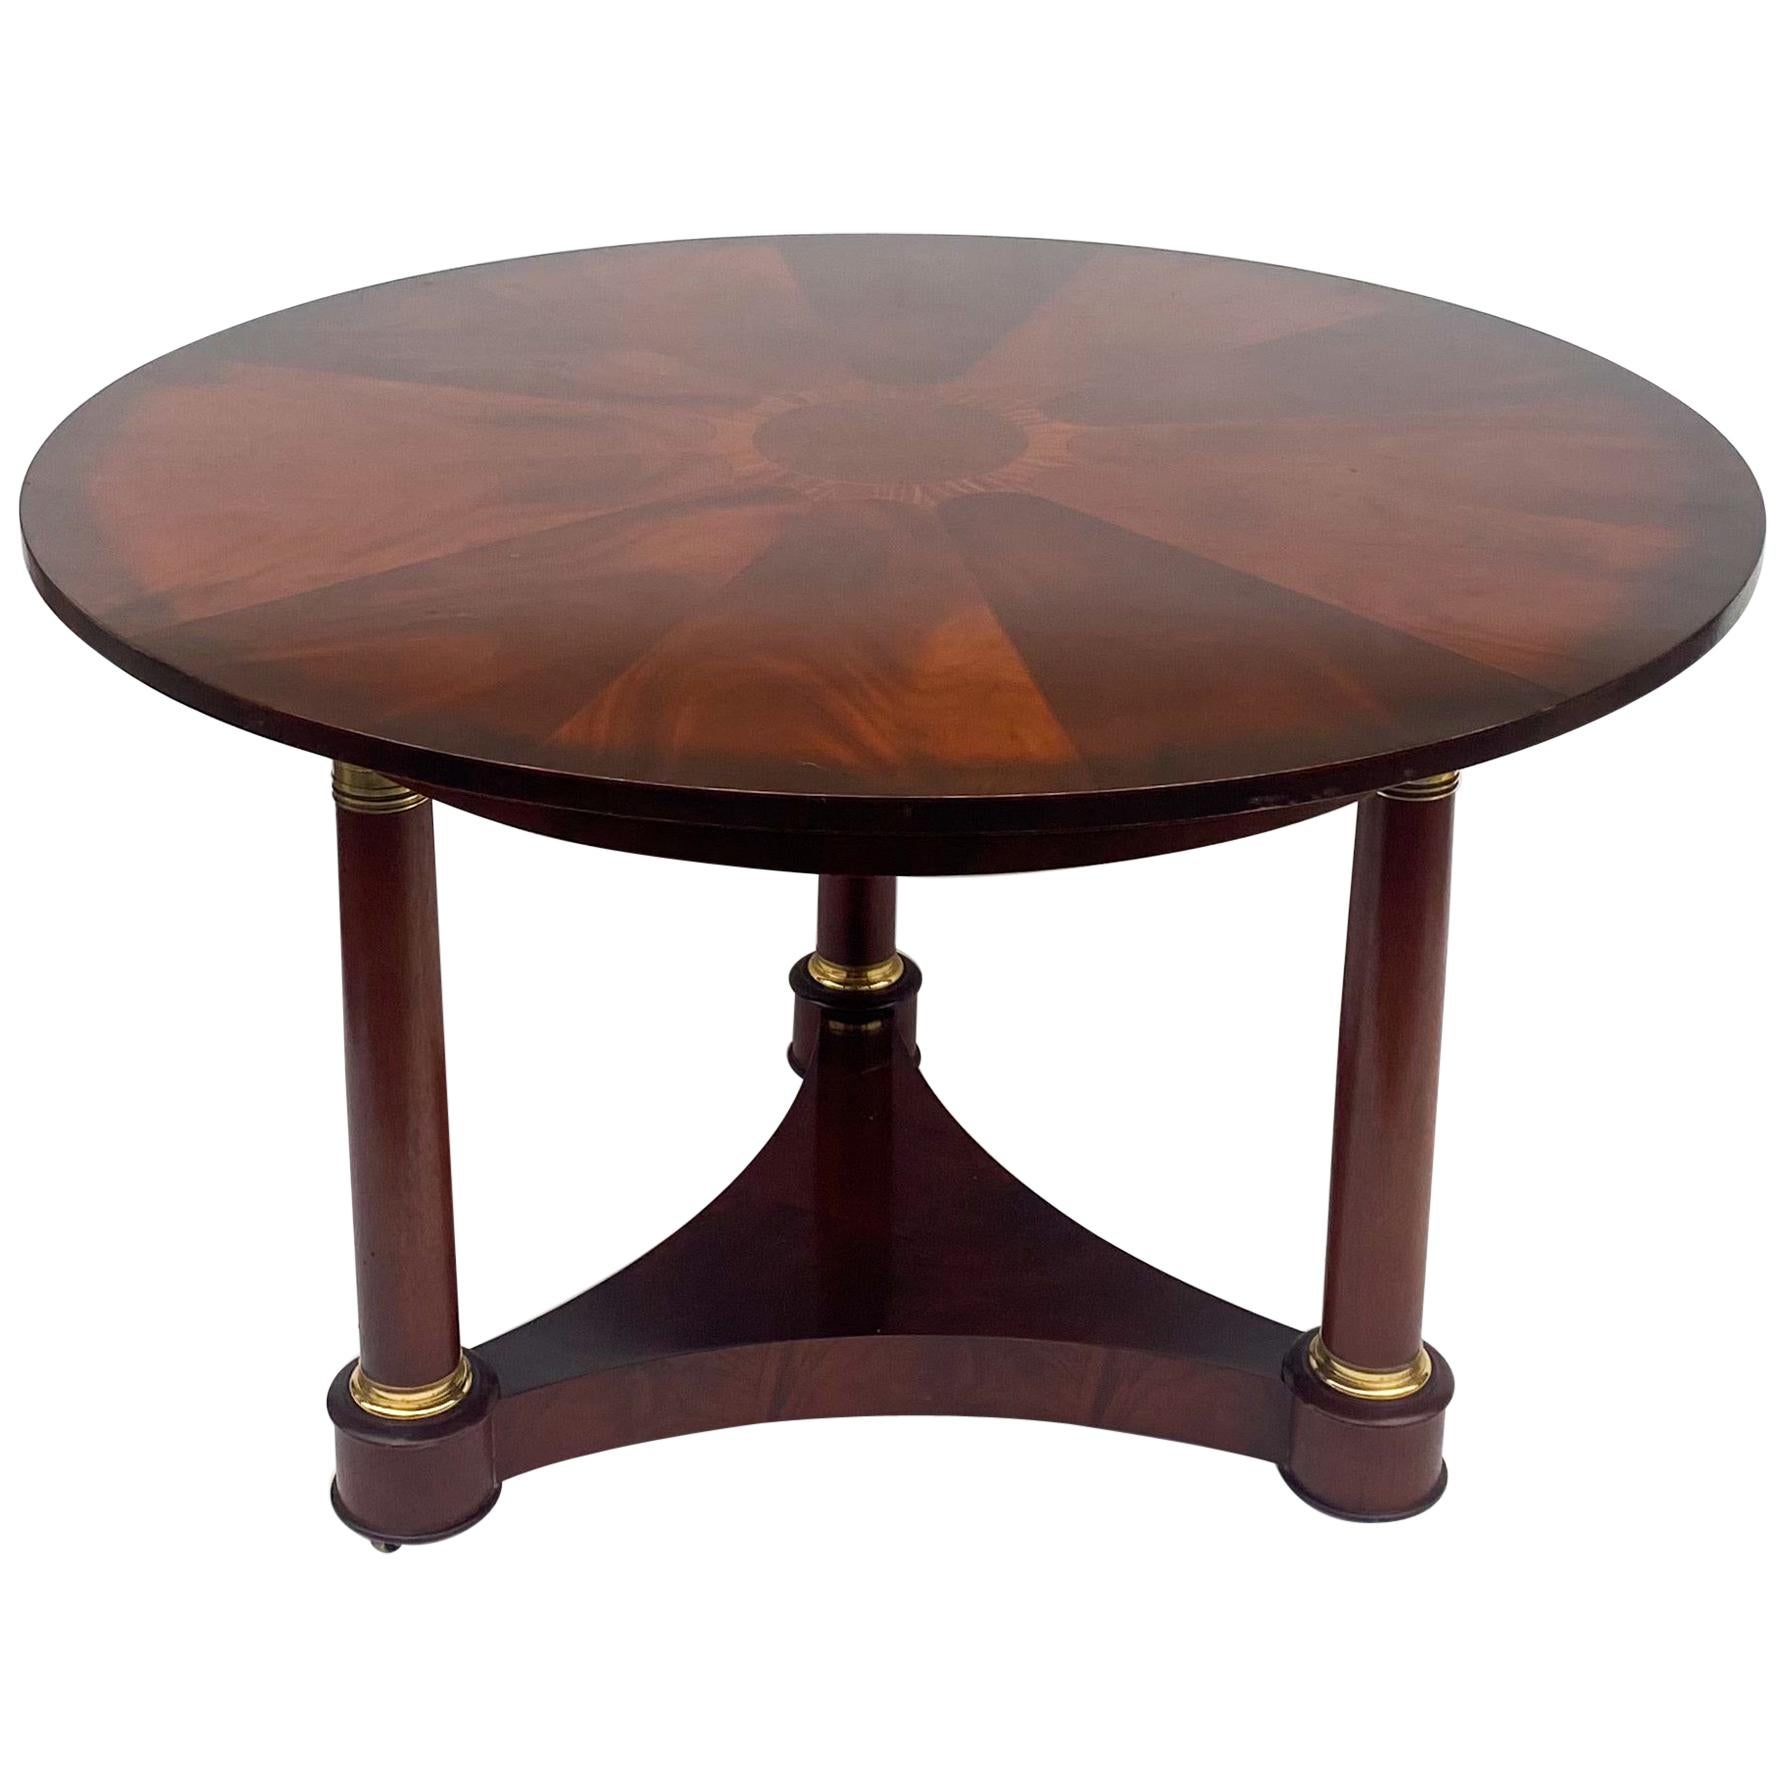 20th Century Mahogany Inlaid Empire Style Center Table by Baker Furniture